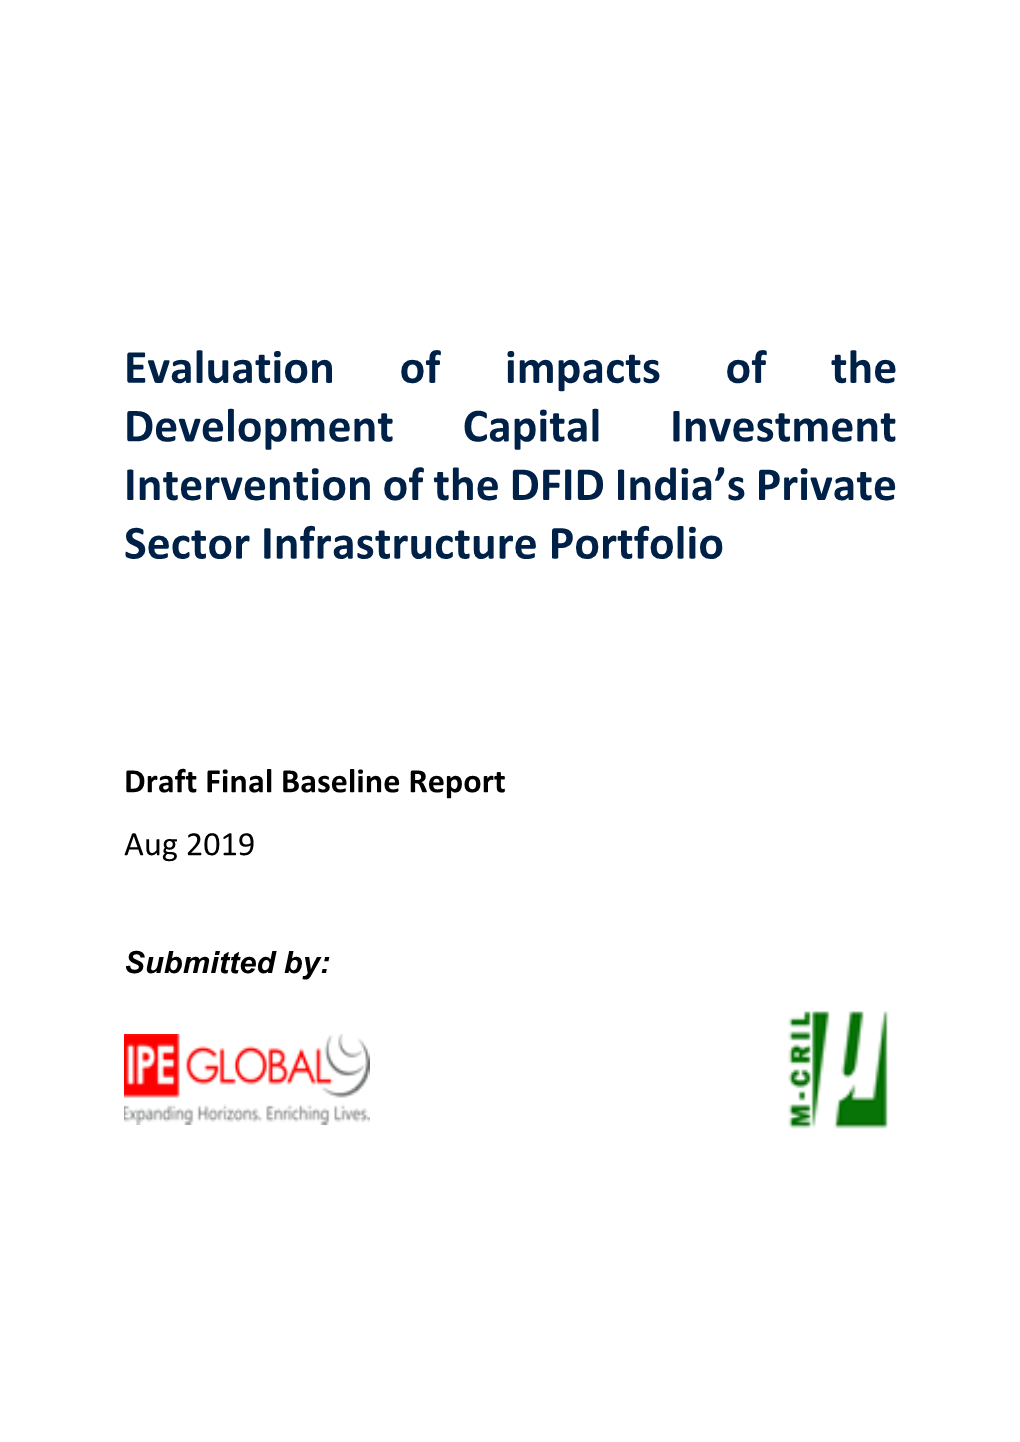 Evaluation of Impacts of the Development Capital Investment Intervention of the DFID India’S Private Sector Infrastructure Portfolio